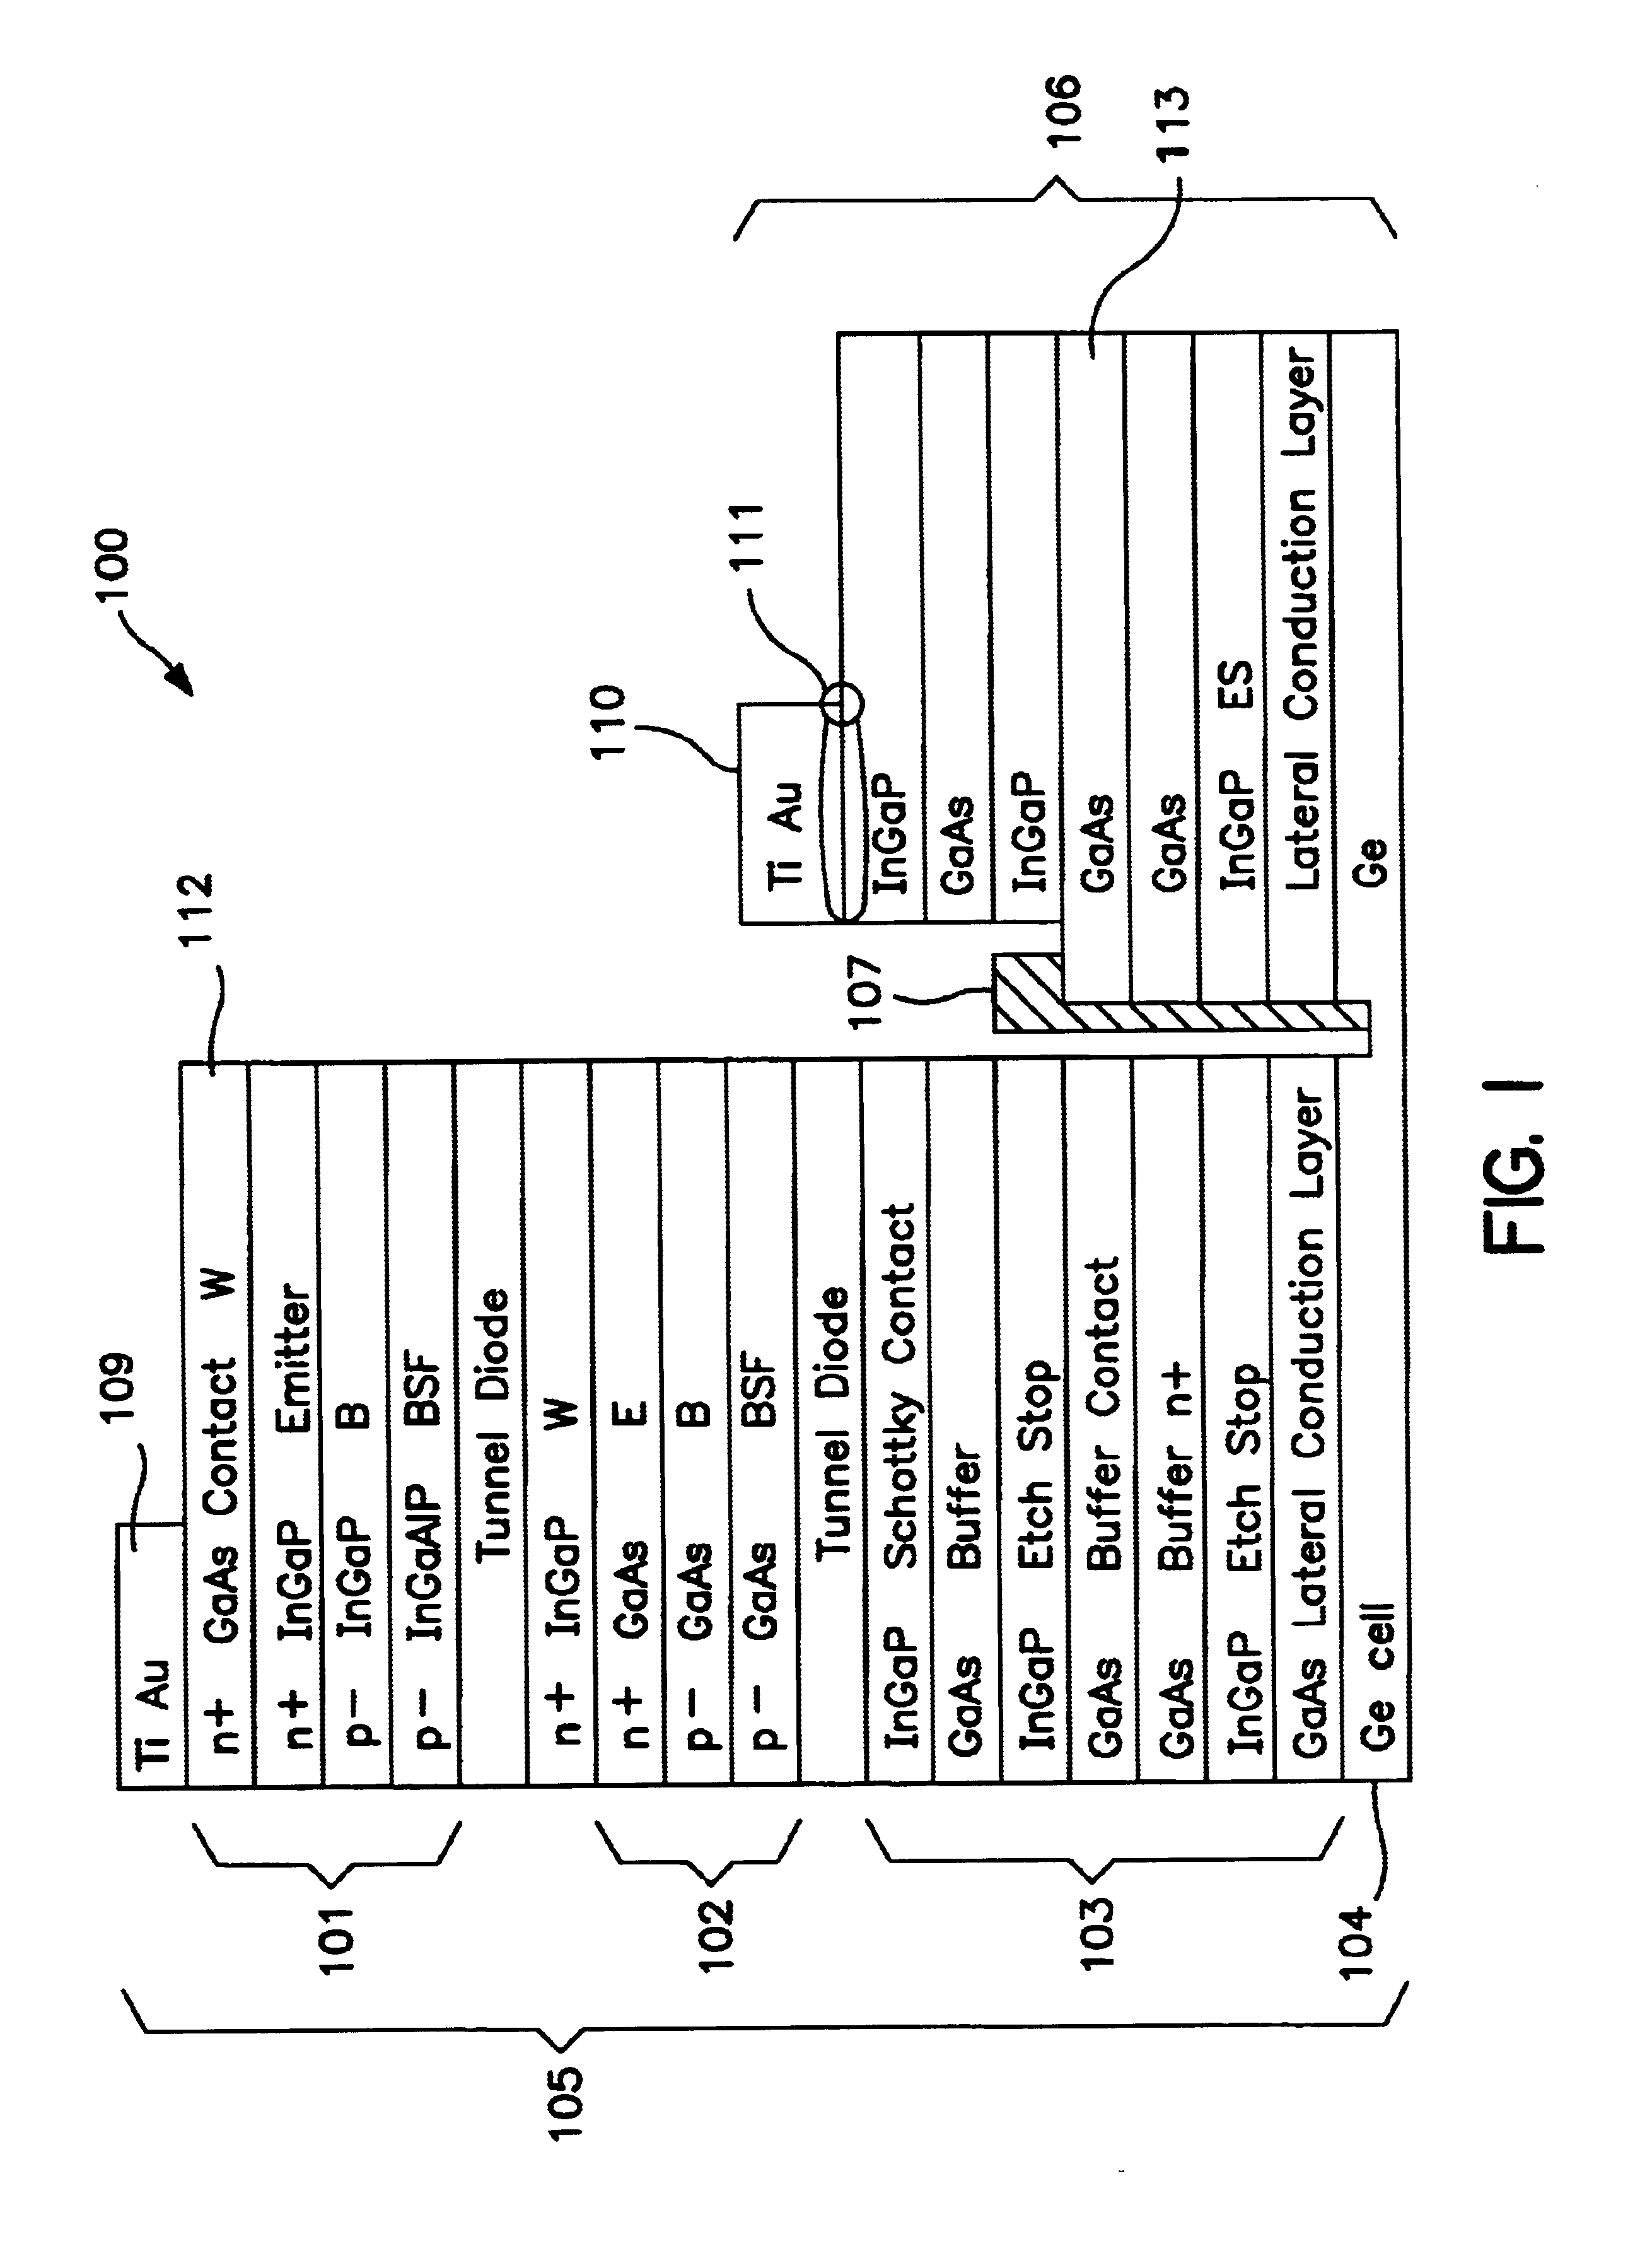 Apparatus and method for integral bypass diode in solar cells